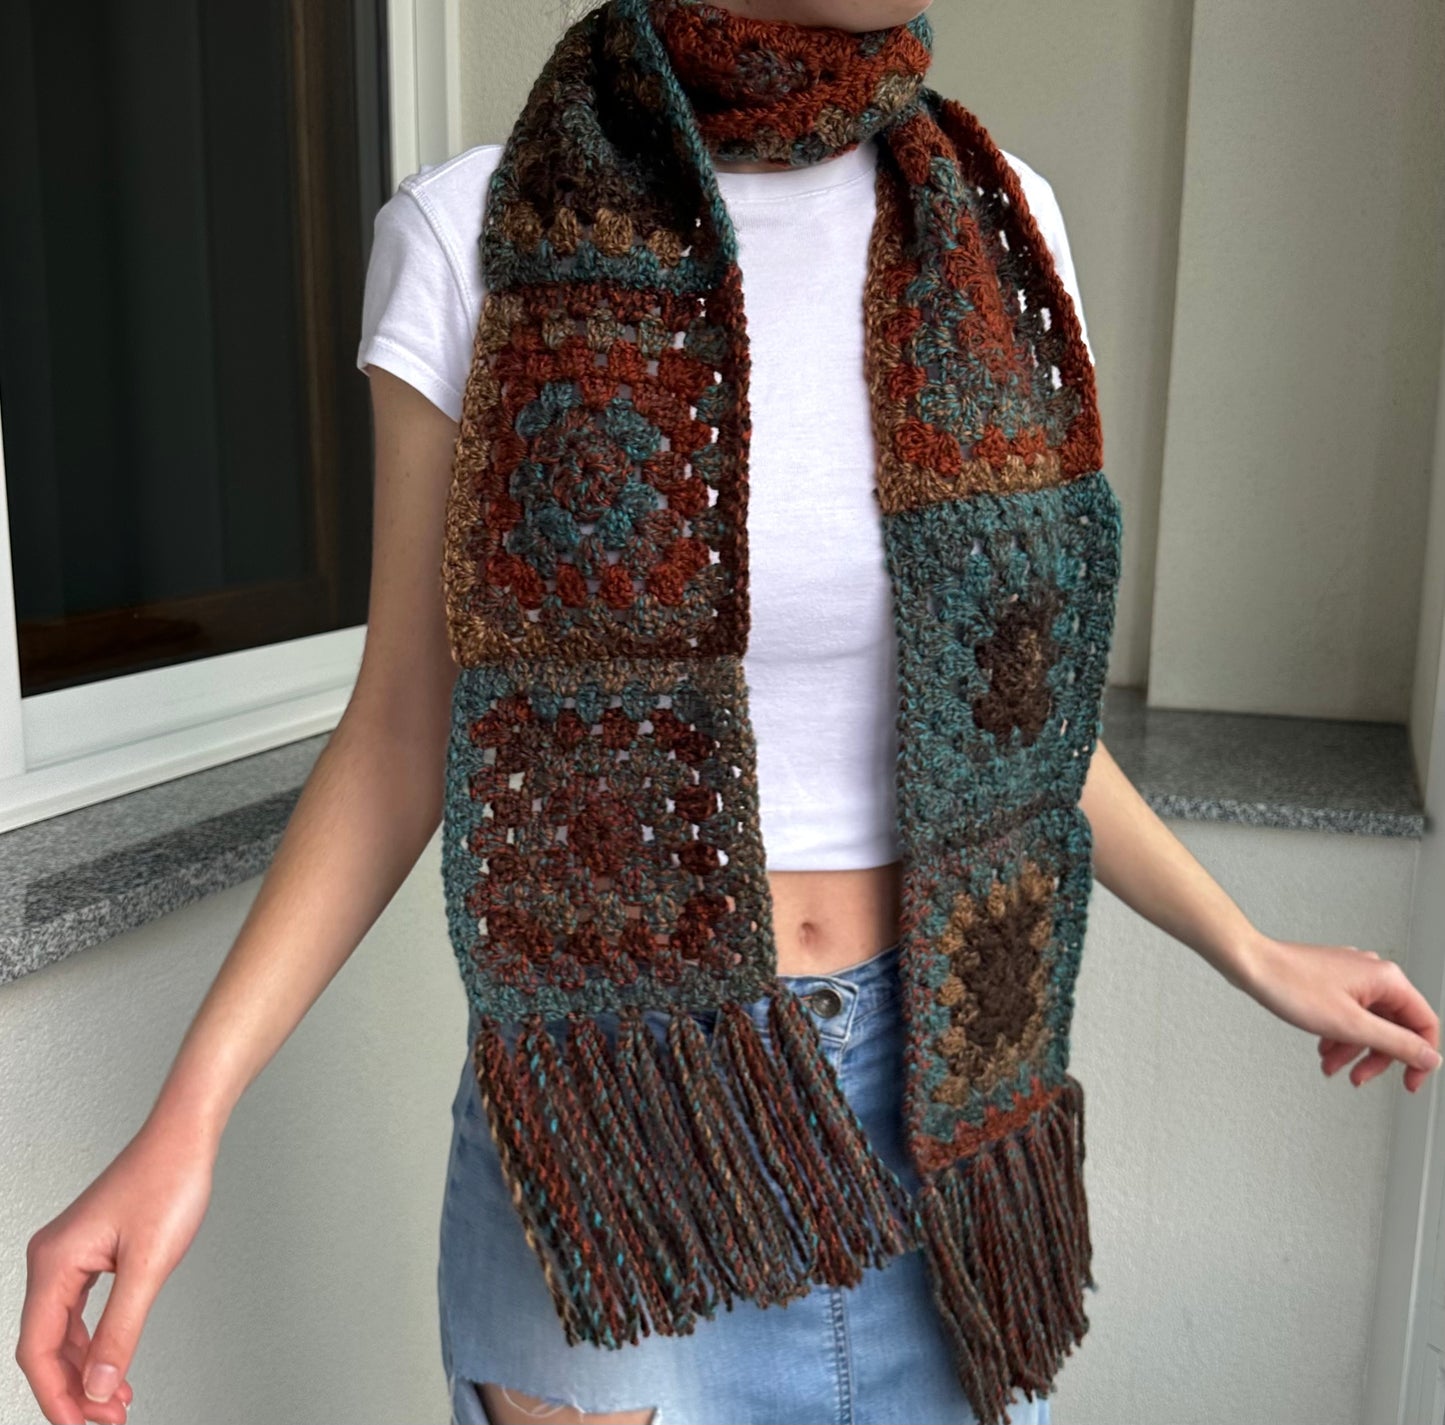 Handmade brown and blue granny square crochet scarf